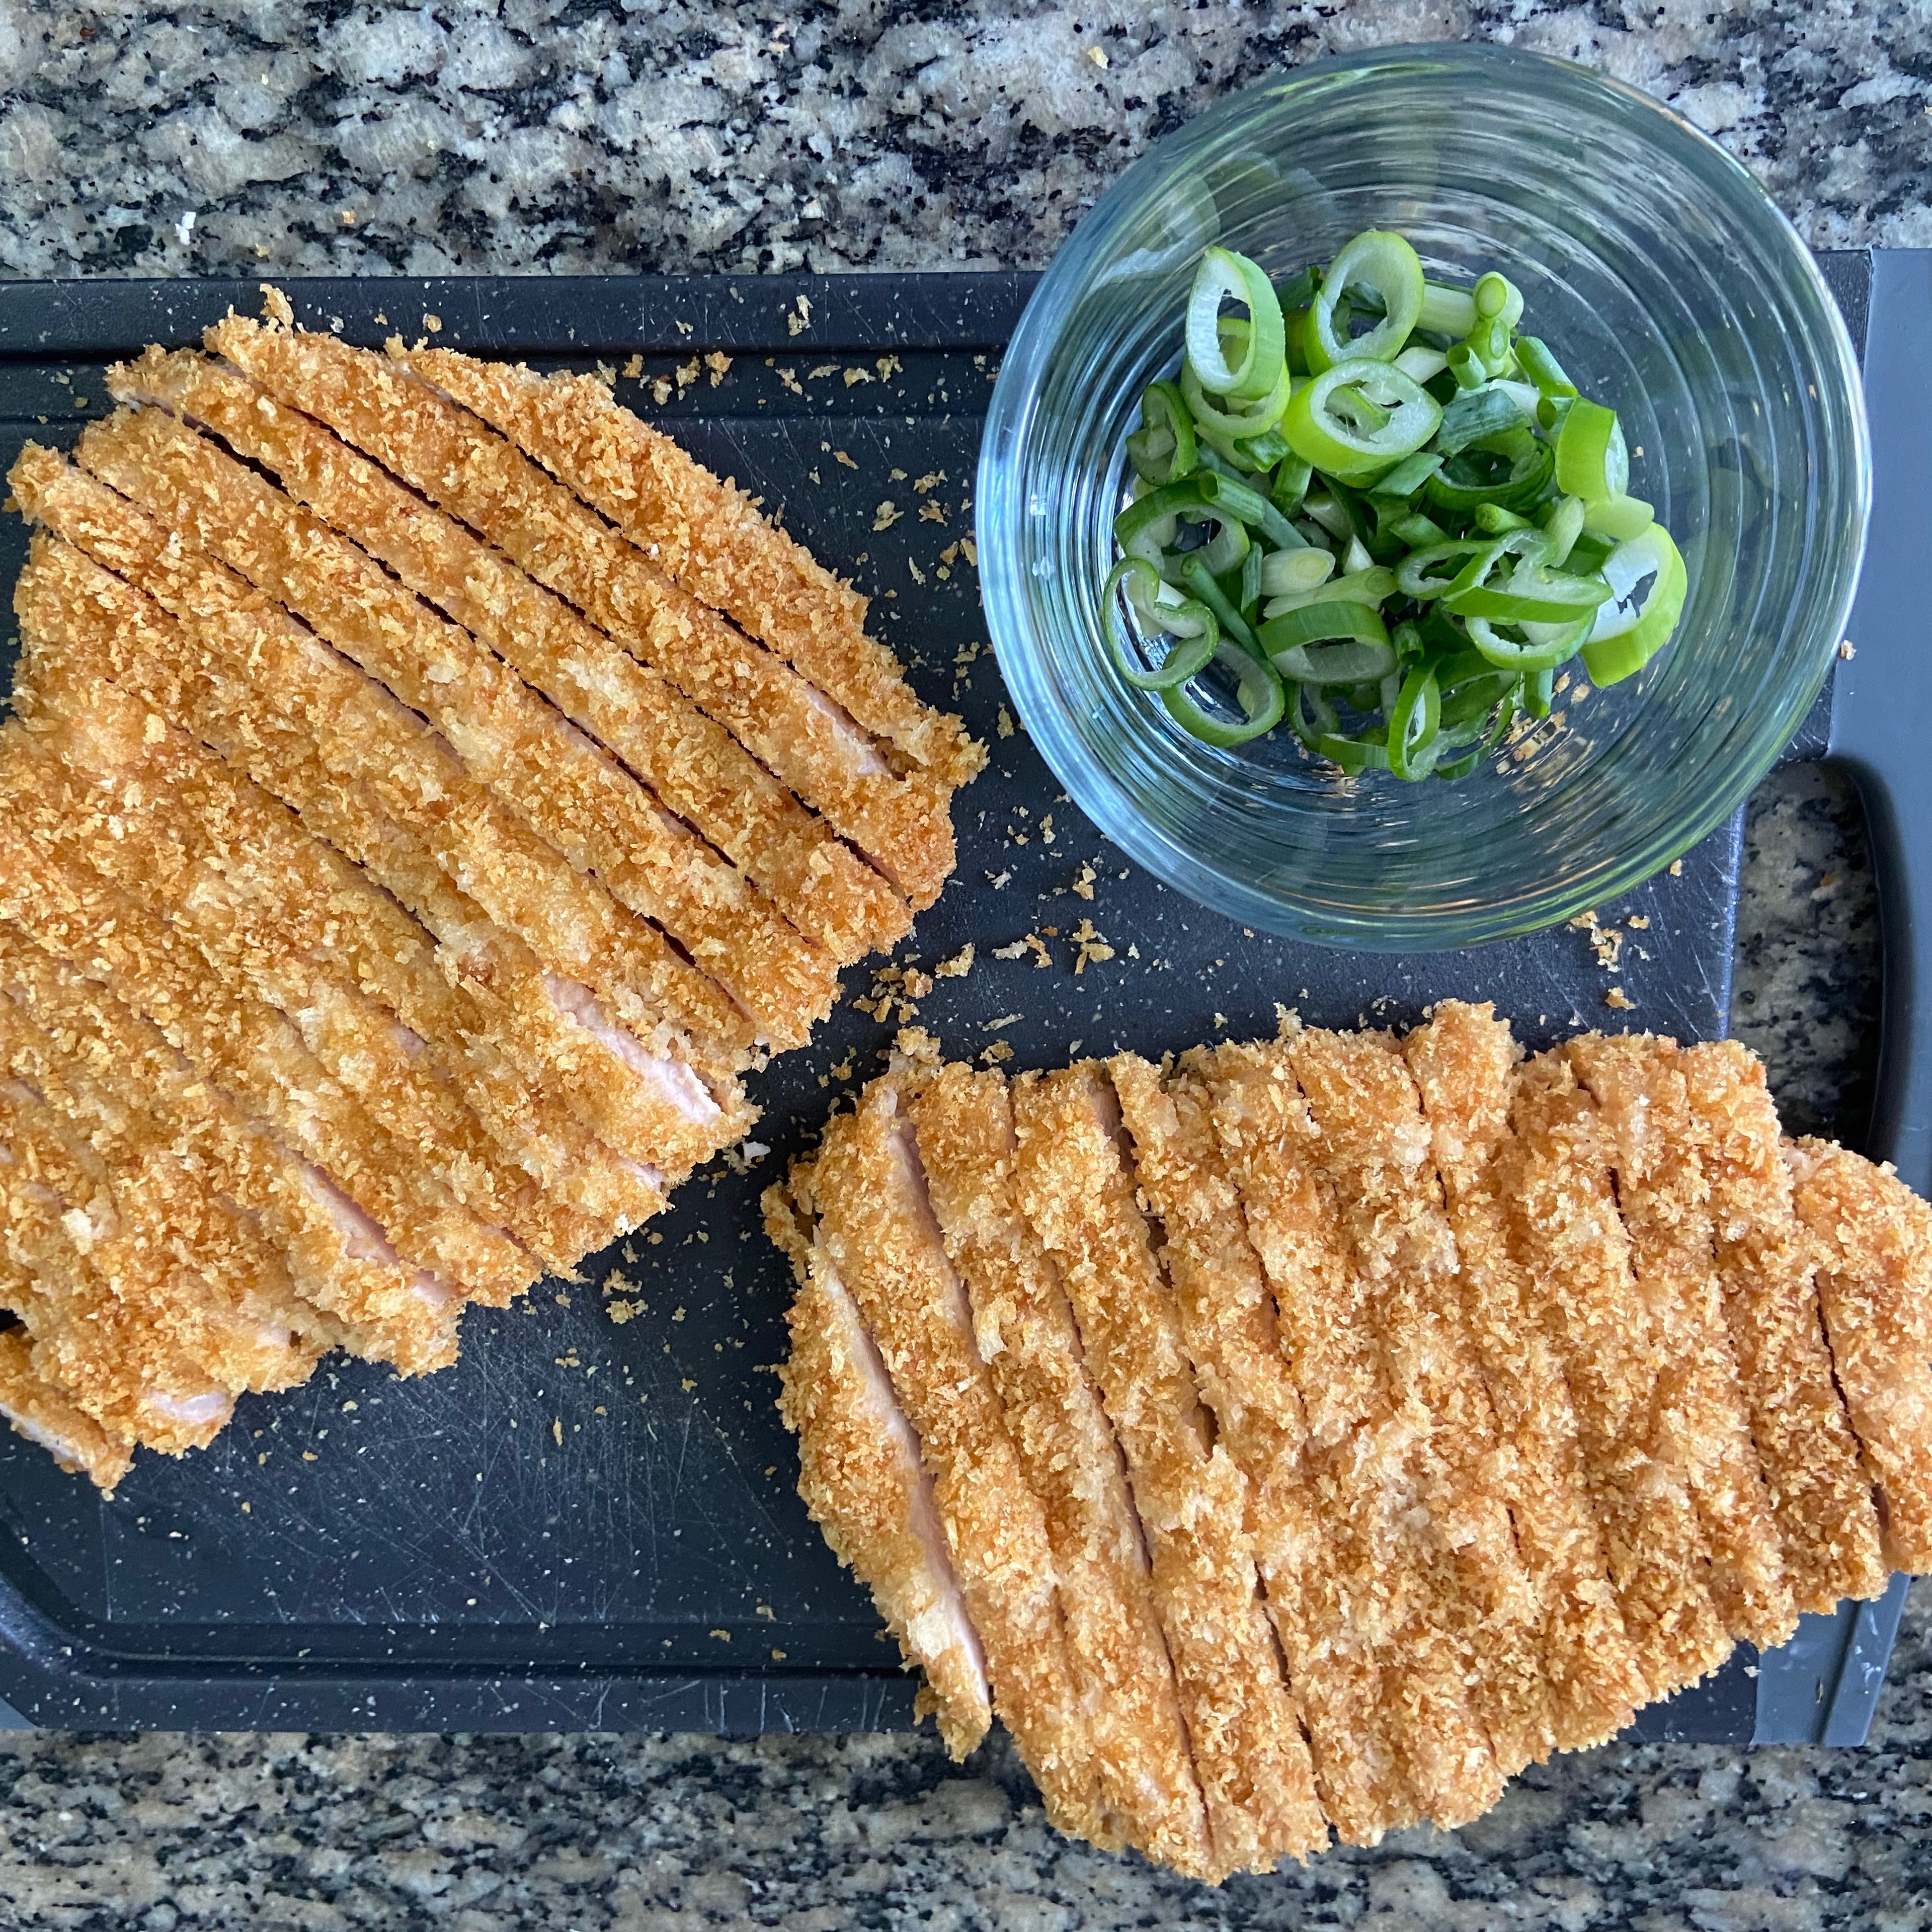 While the sauce is cooking, thinly slice two cutlets while still maintaining the original shape of the cutlet. Also, slice the scallion and set aside for garnishing at the end.